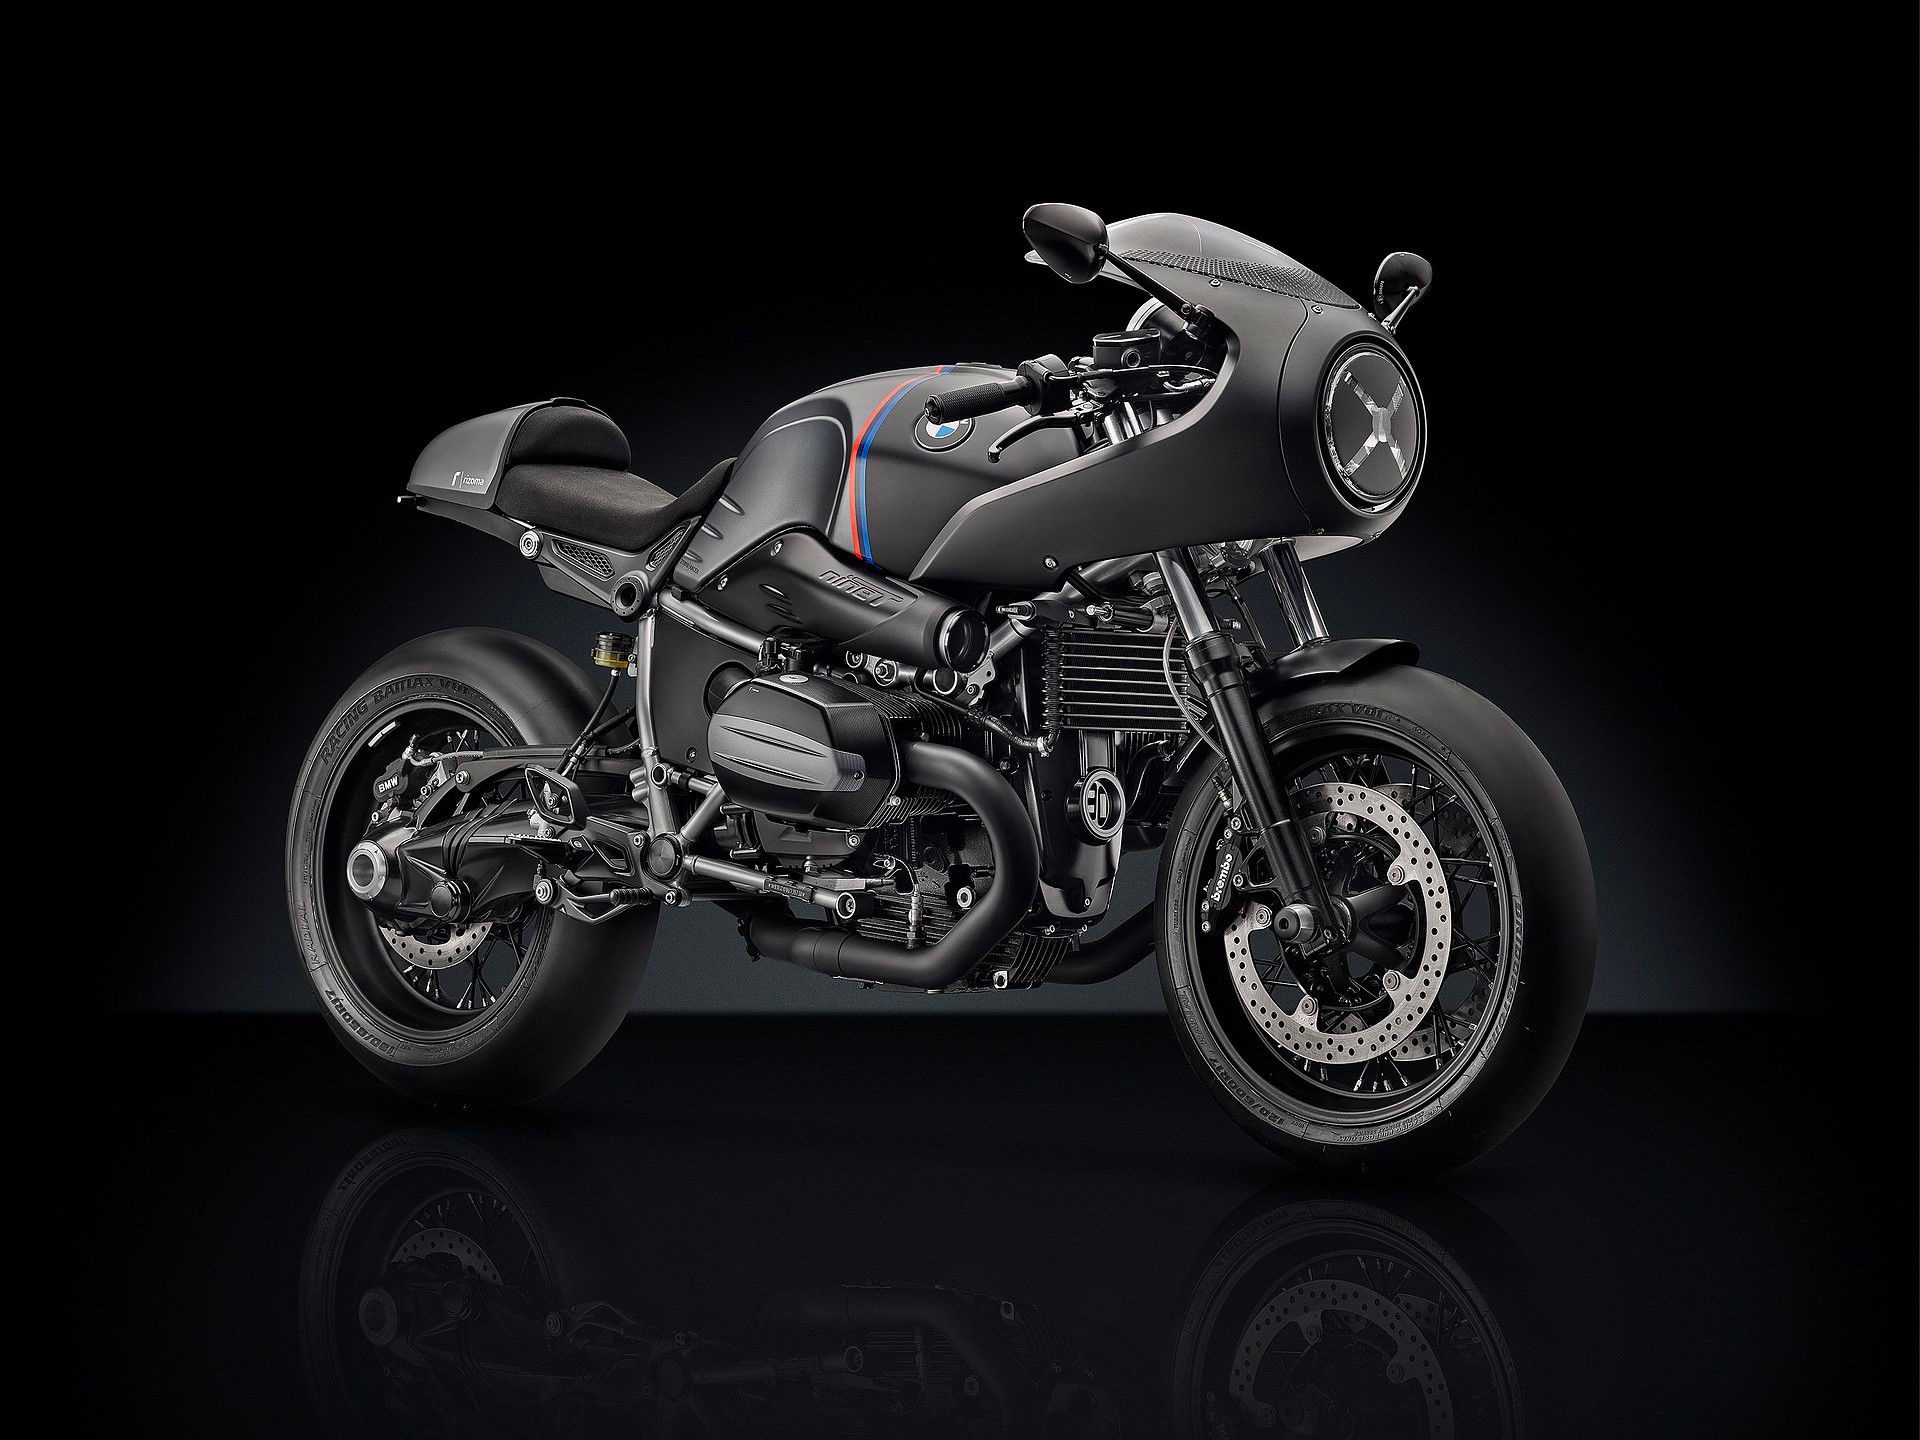 A customised BMW R nineT cafe racer motorcycle by Rizoma